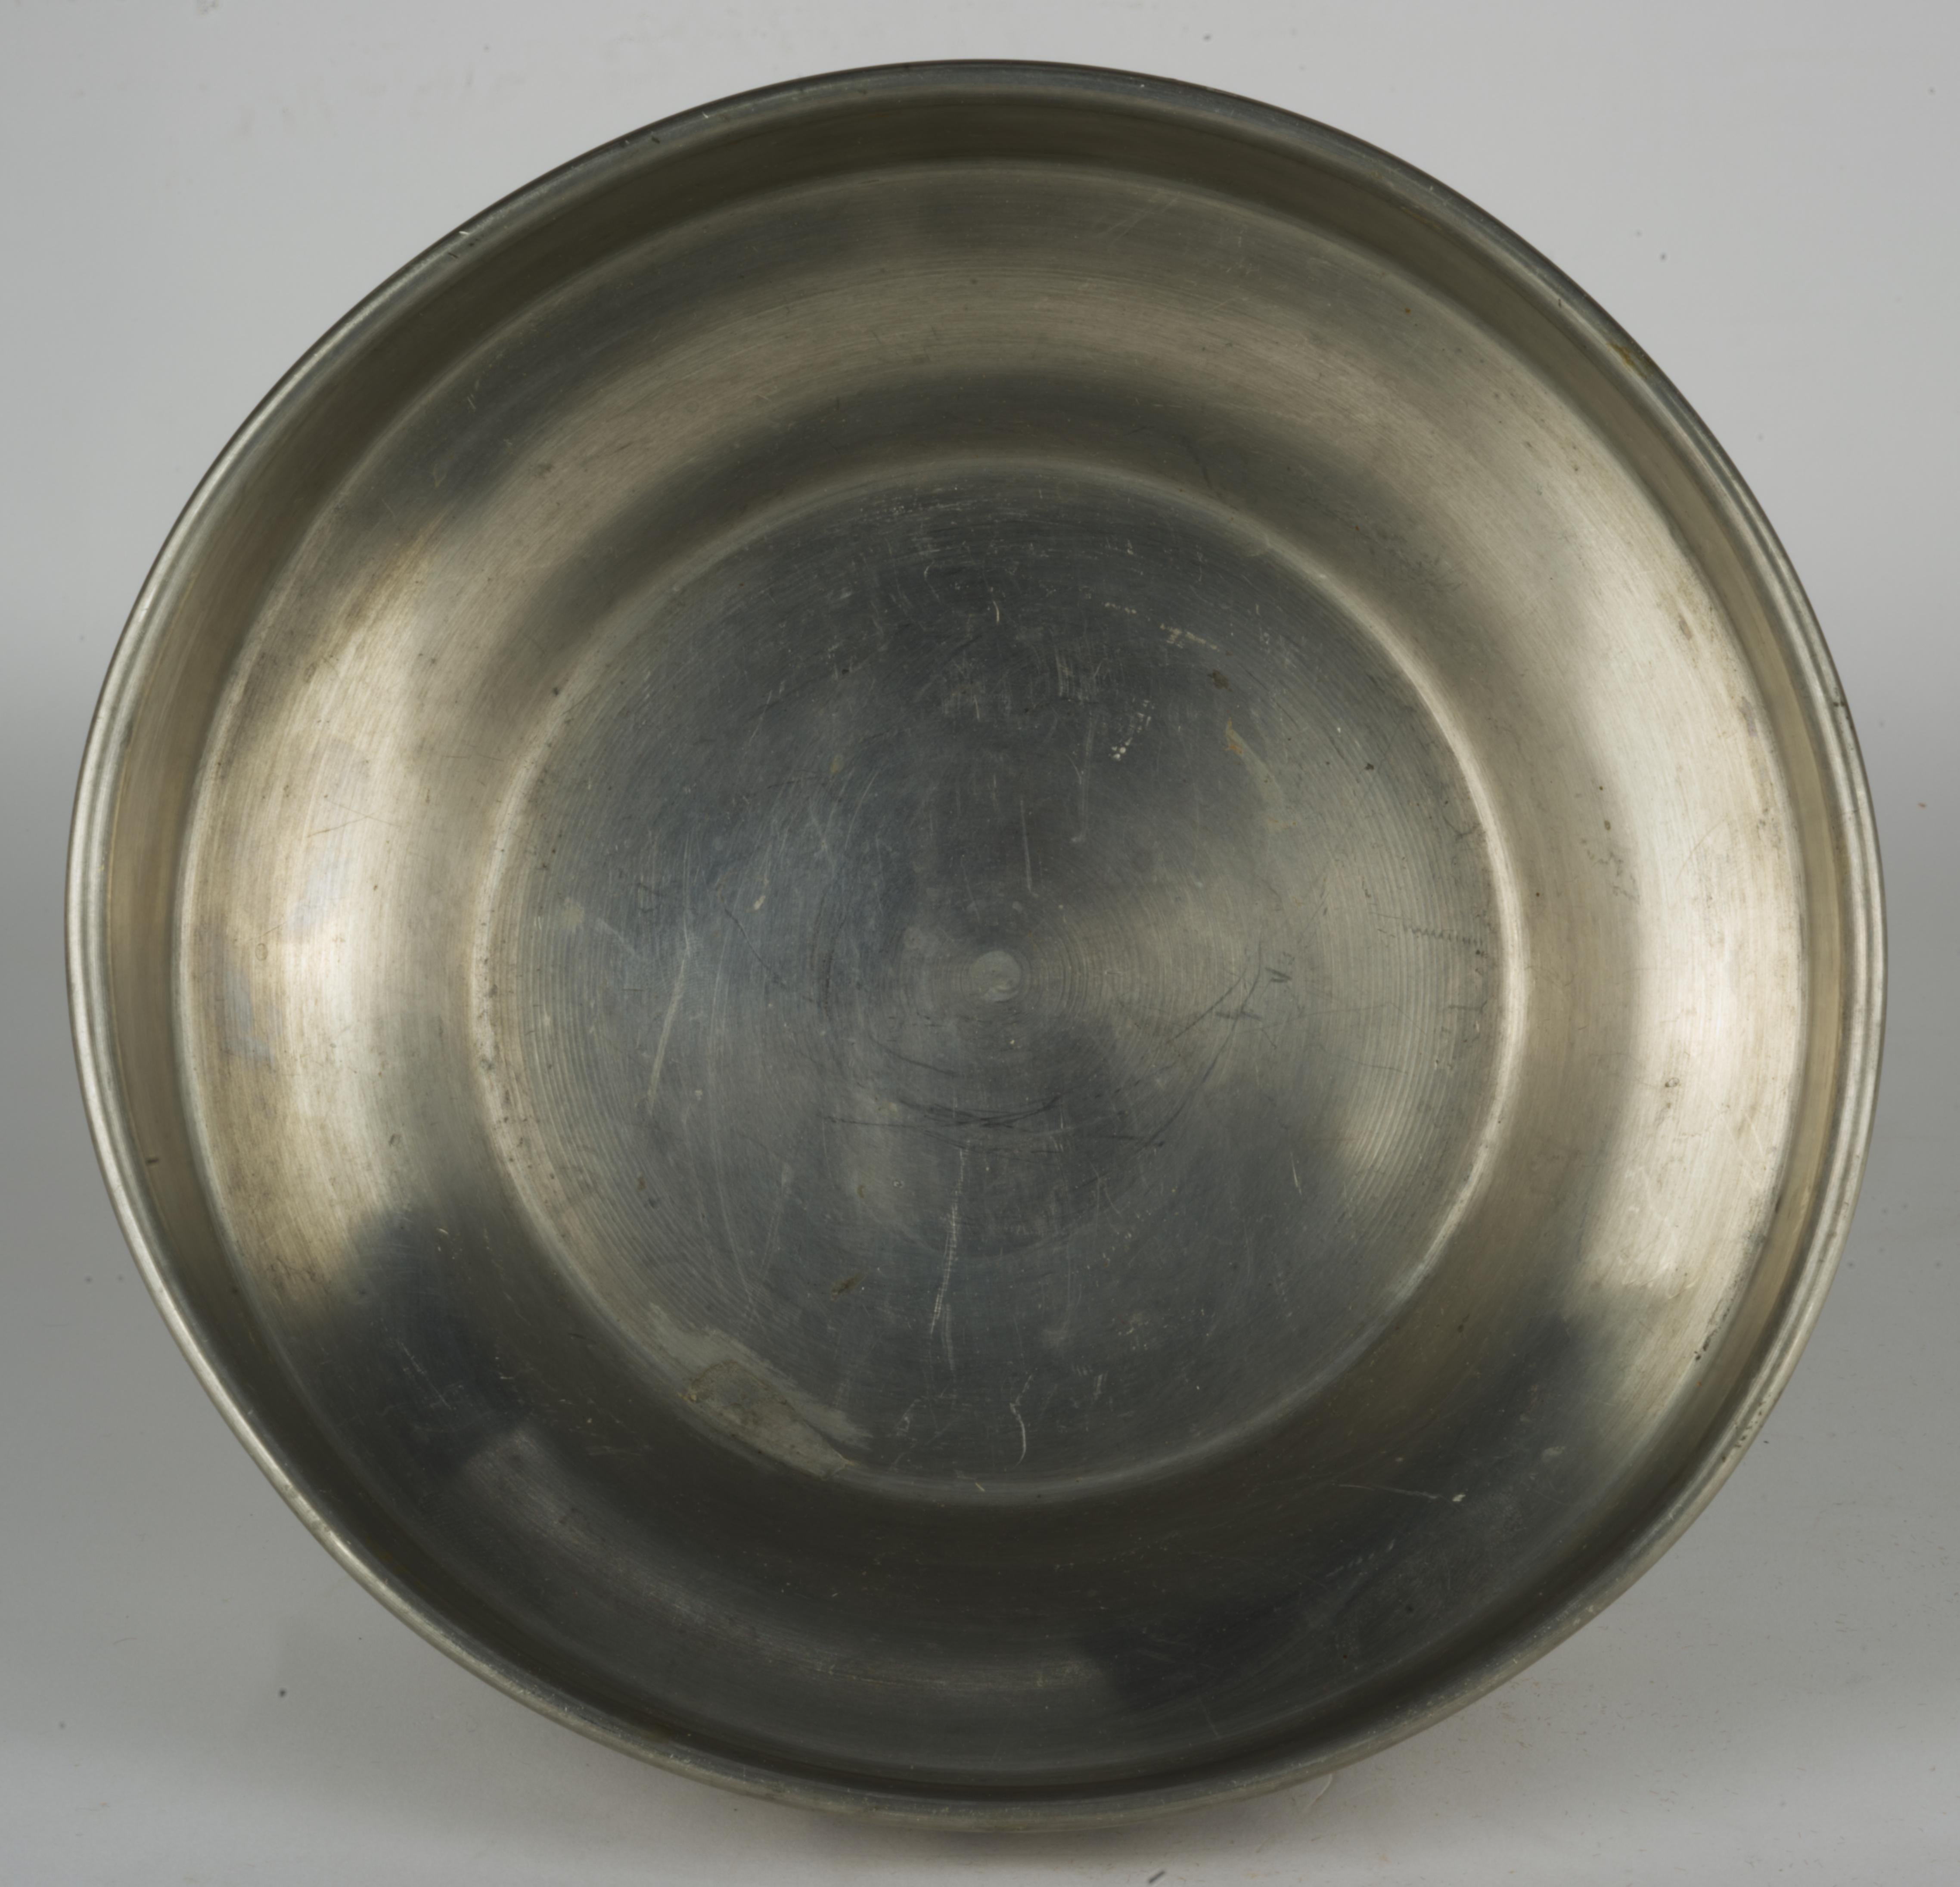 Rare Mastad Norway Footed Bowl Scandinavian Pewter 1950s For Sale 1